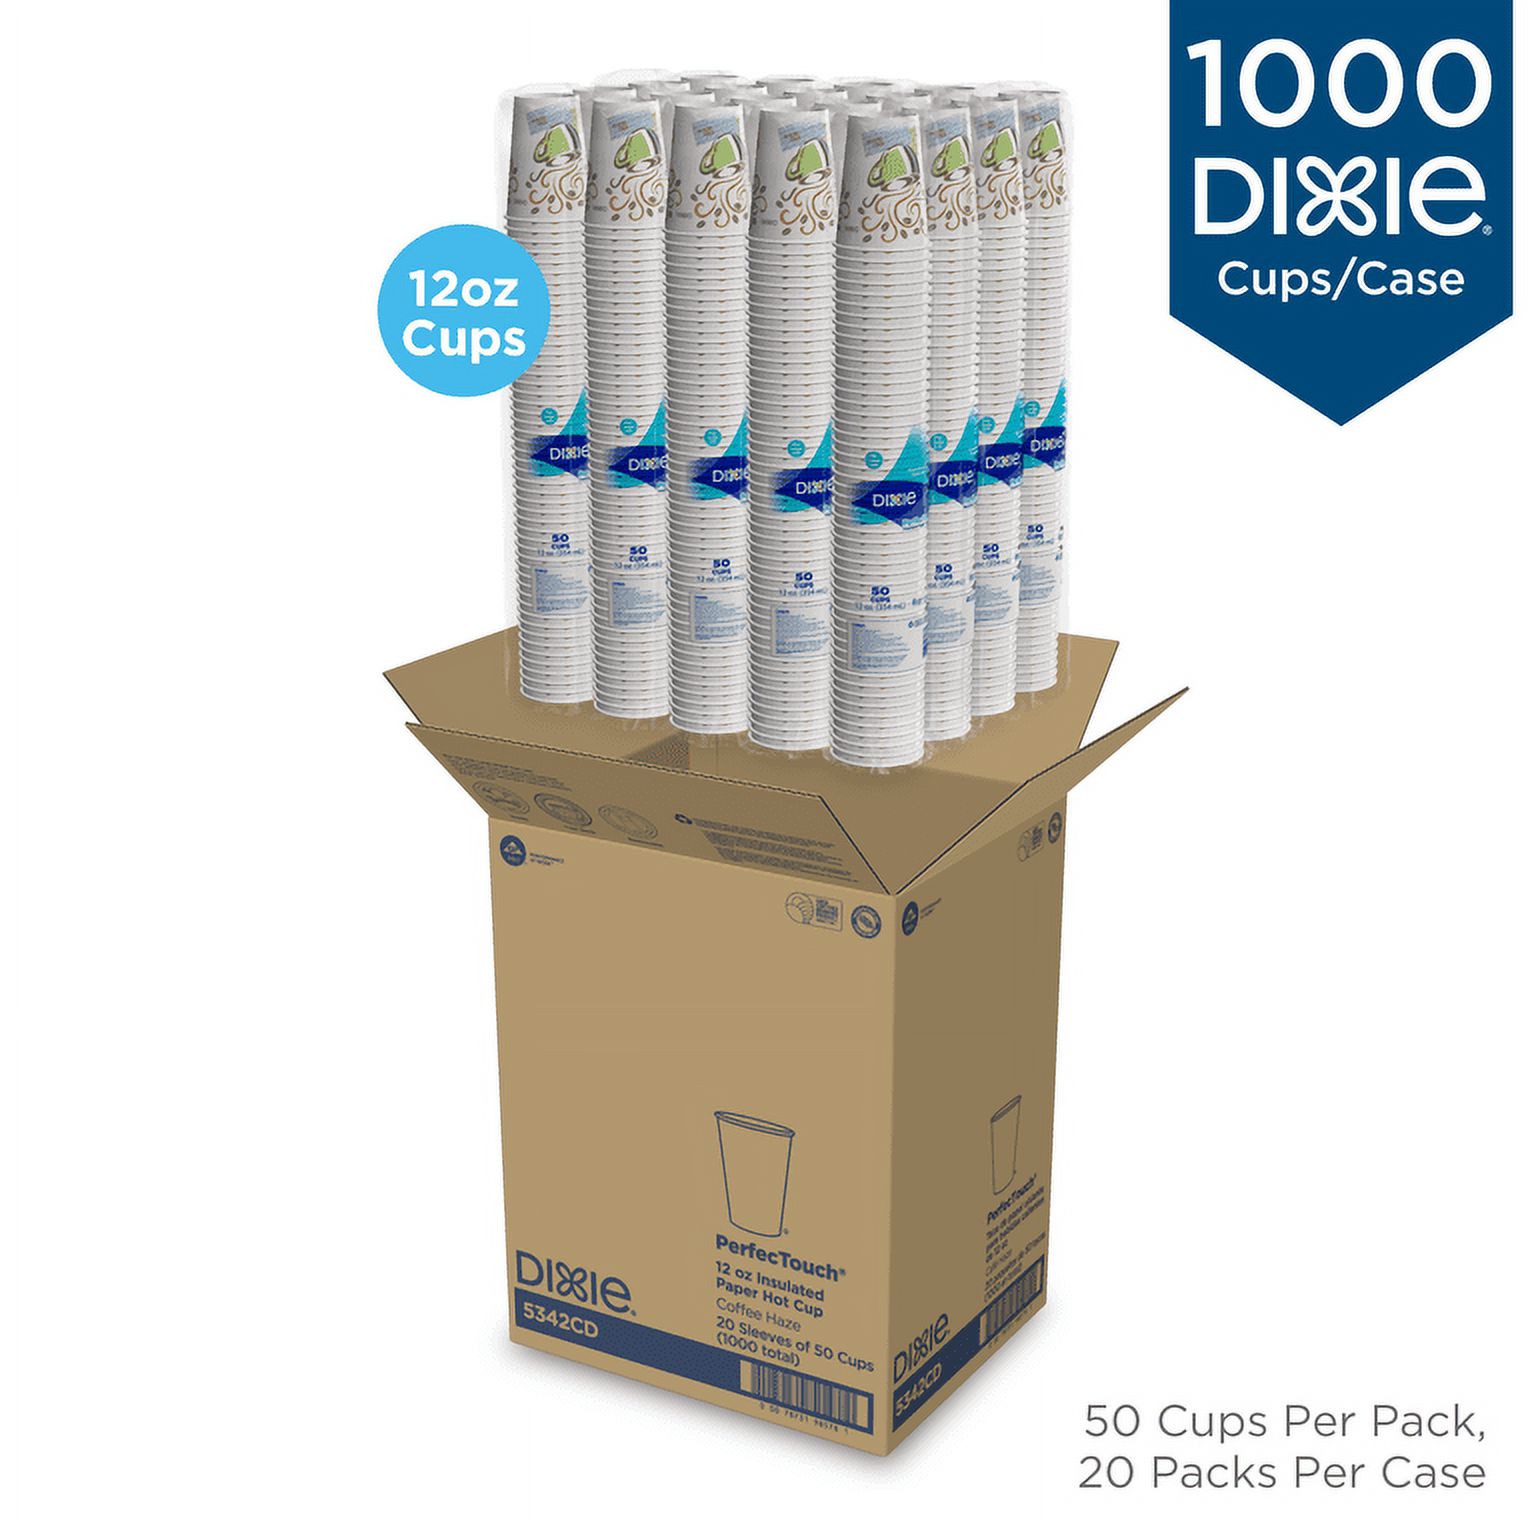 Dixie® PerfecTouch® 12 oz. Insulated Paper Hot Coffee Cup, 5342CD, 1,000 Count (50 Cups Per Sleeve, 20 Sleeves Per Case) - image 1 of 11